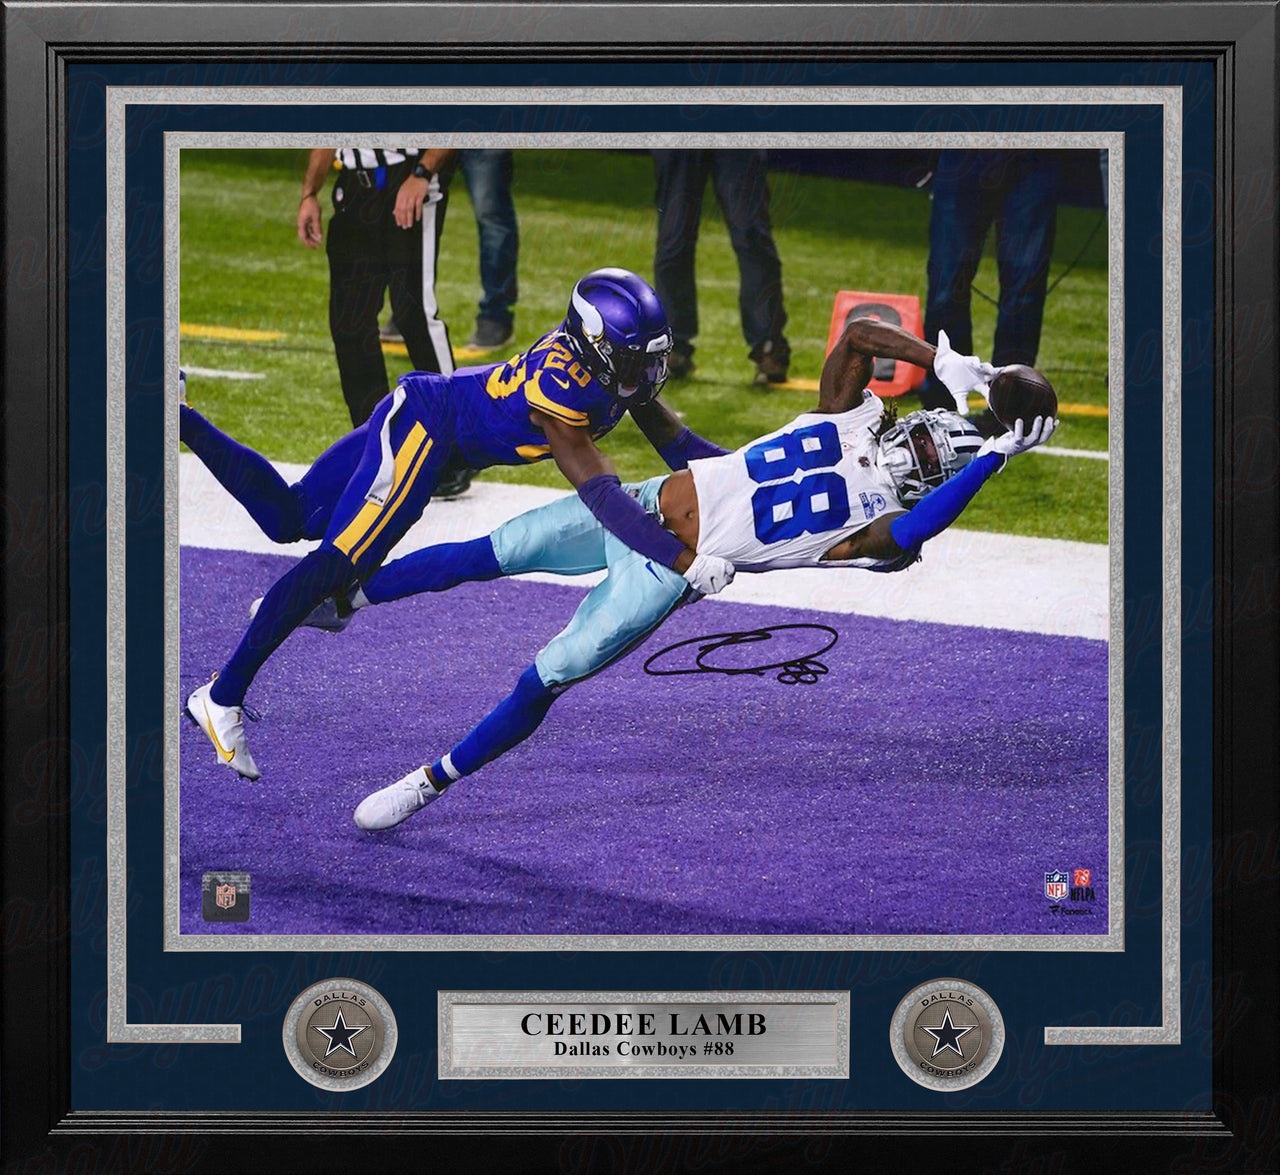 CeeDee Lamb Diving Touchdown Dallas Cowboys Autographed 16" x 20" Framed Football Photo